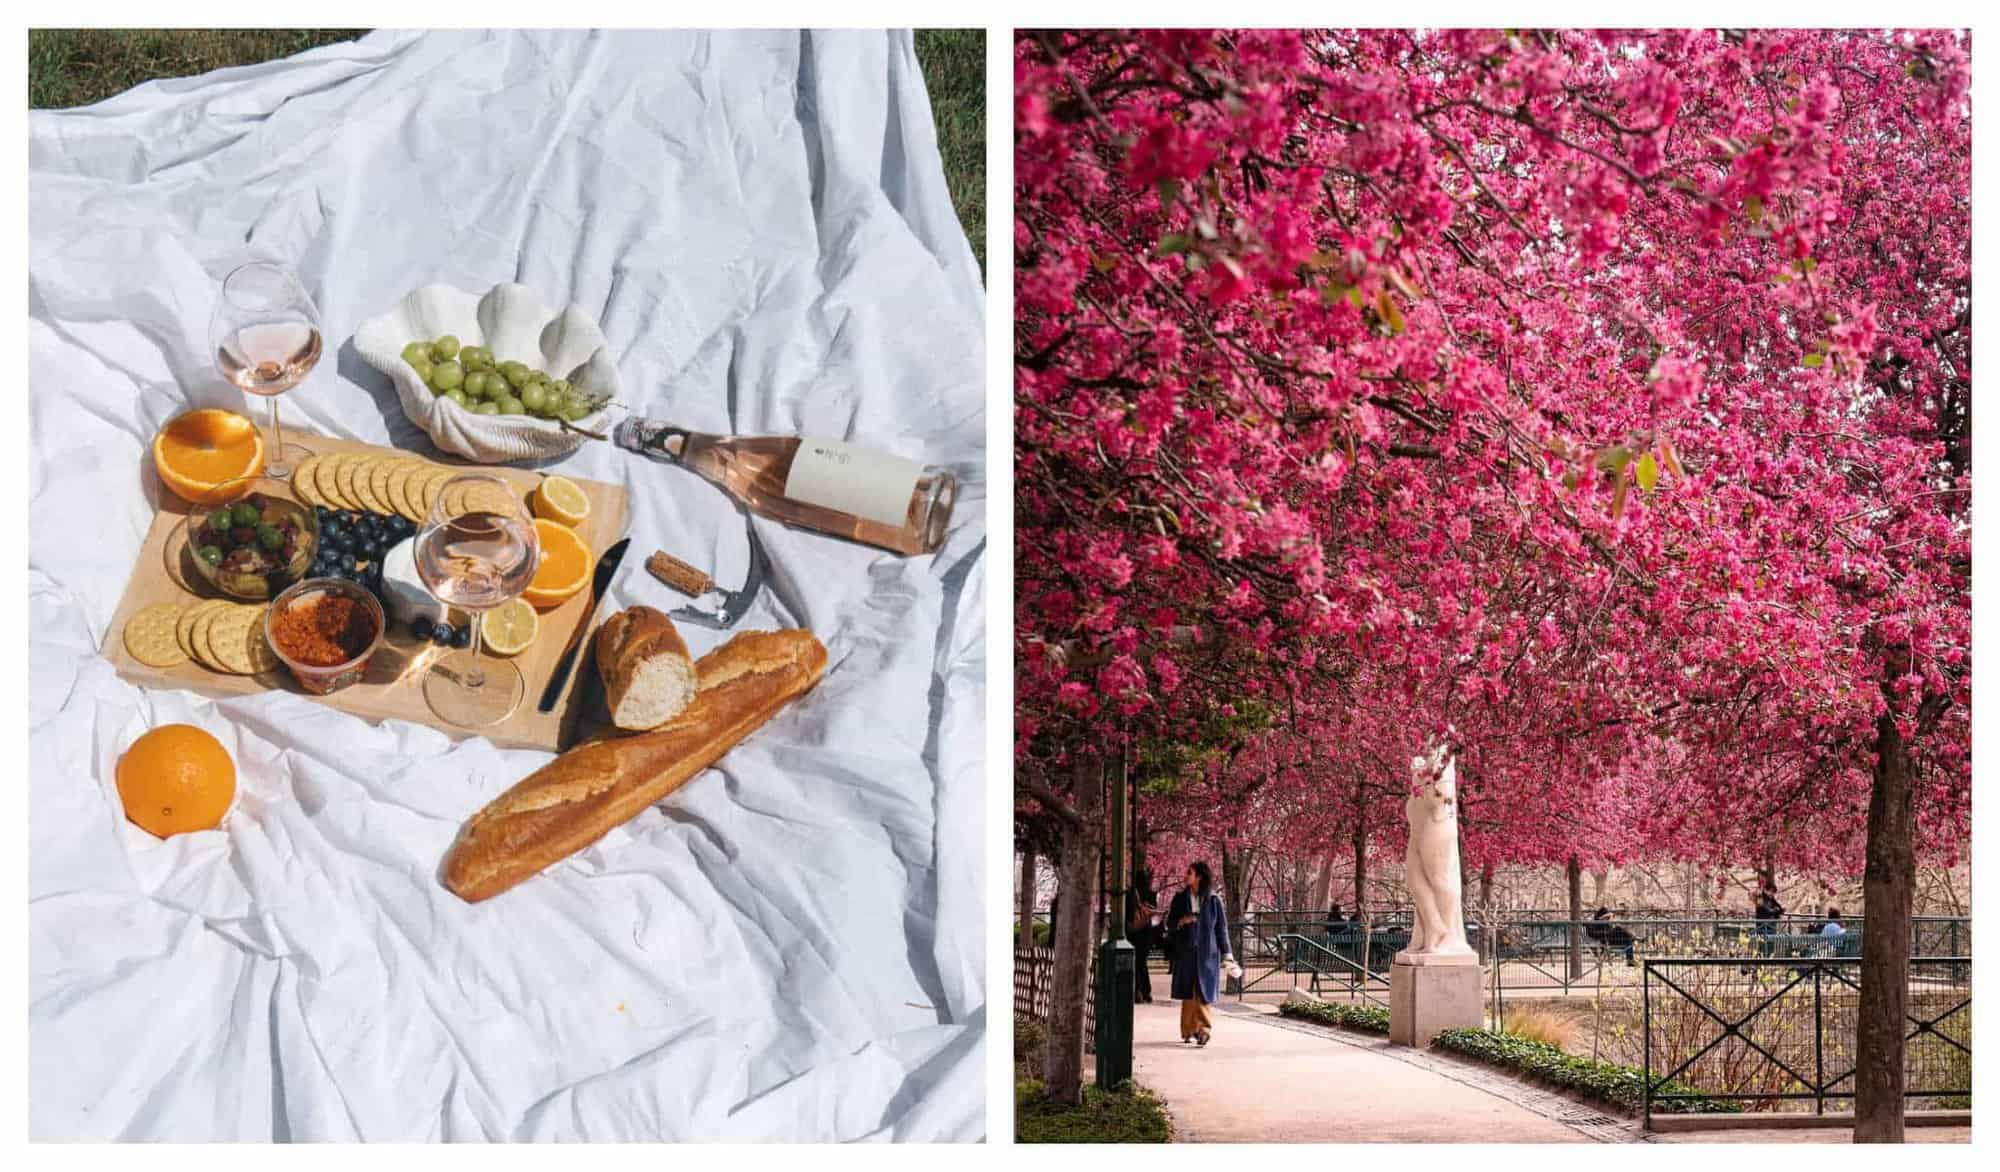 Left: A white picnic blanket with fruits, bread and wine. Right: A park filled with cherry blossom trees in full blloom.